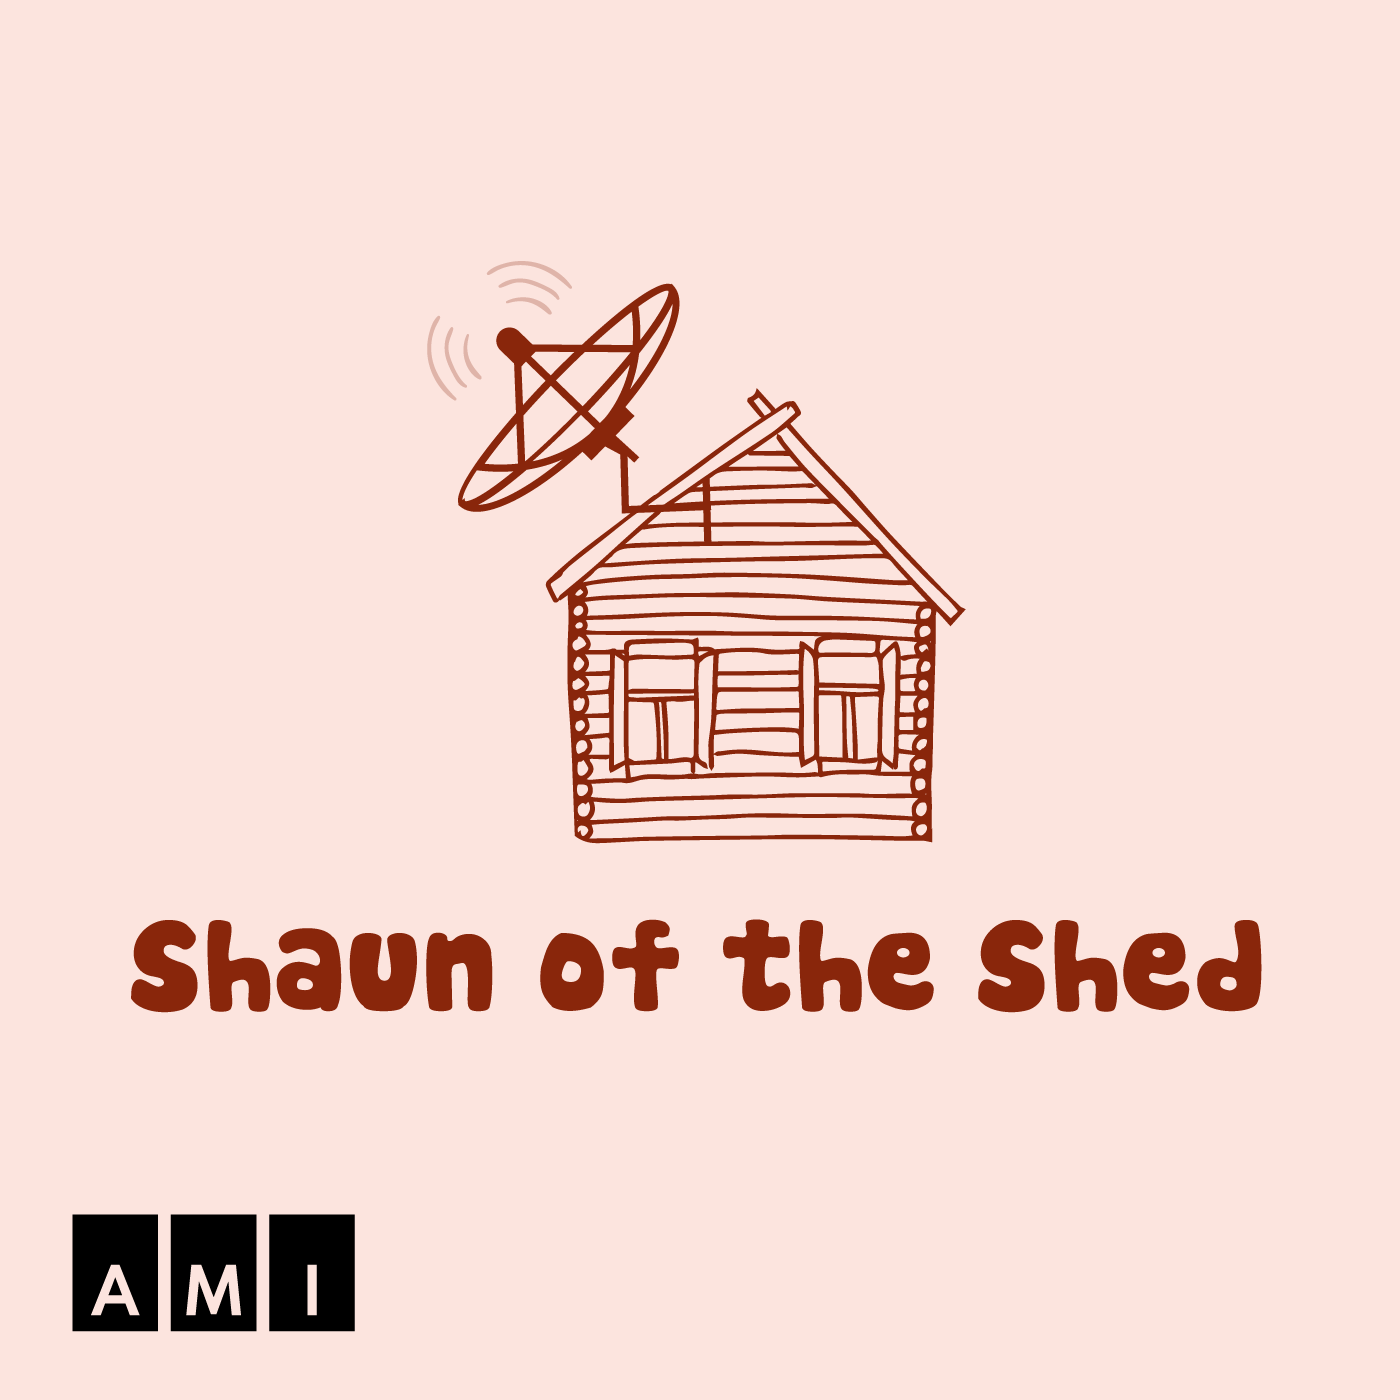 The Shaun of the Shed logo.